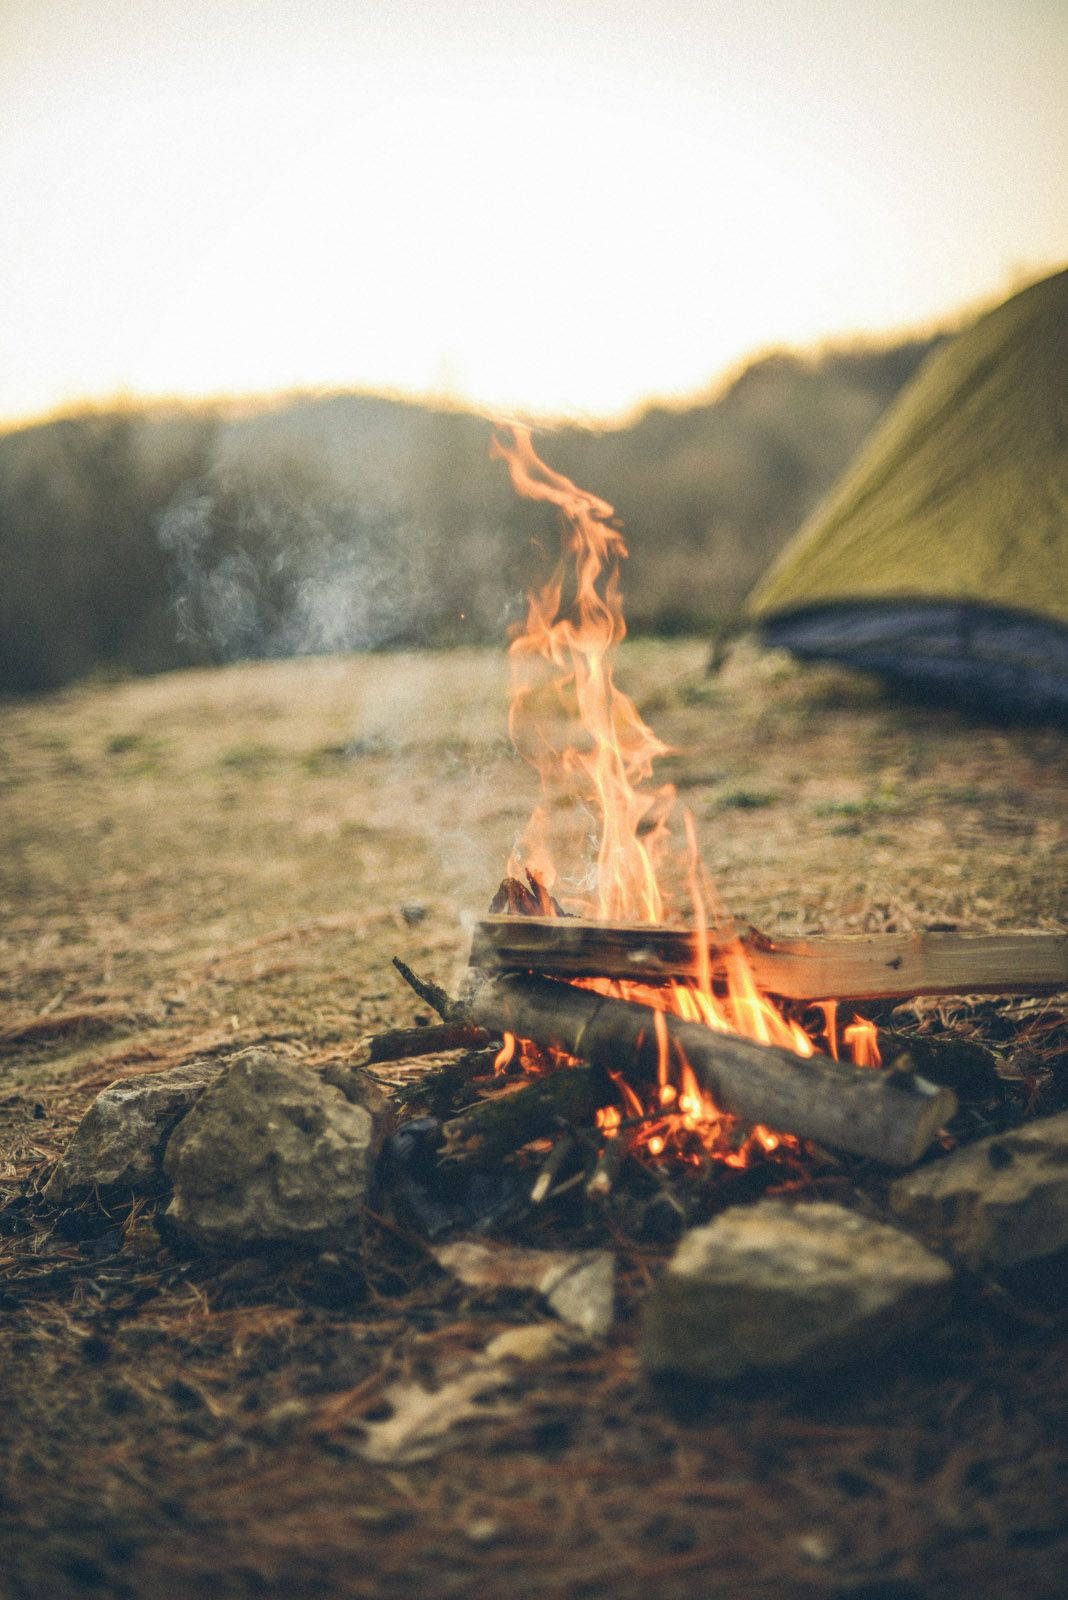 camping 1080P 2k 4k HD wallpapers backgrounds free download  Rare  Gallery